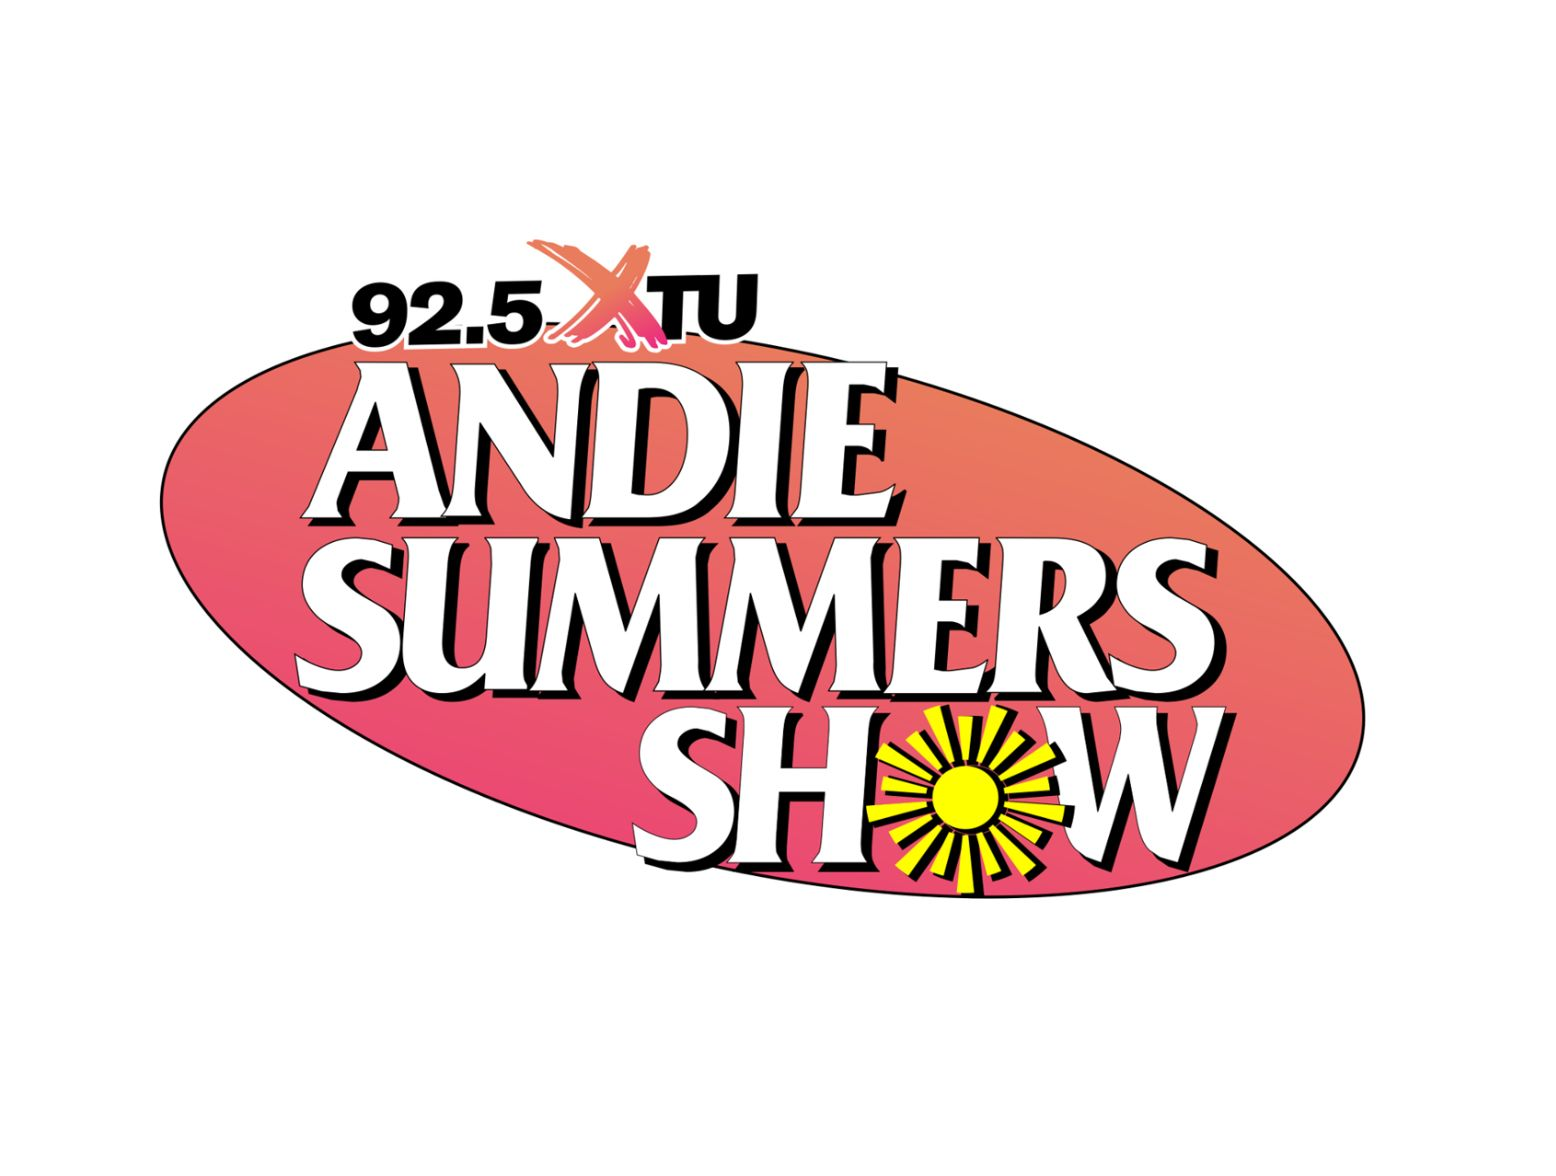 Match Game with The Andie Summers Show